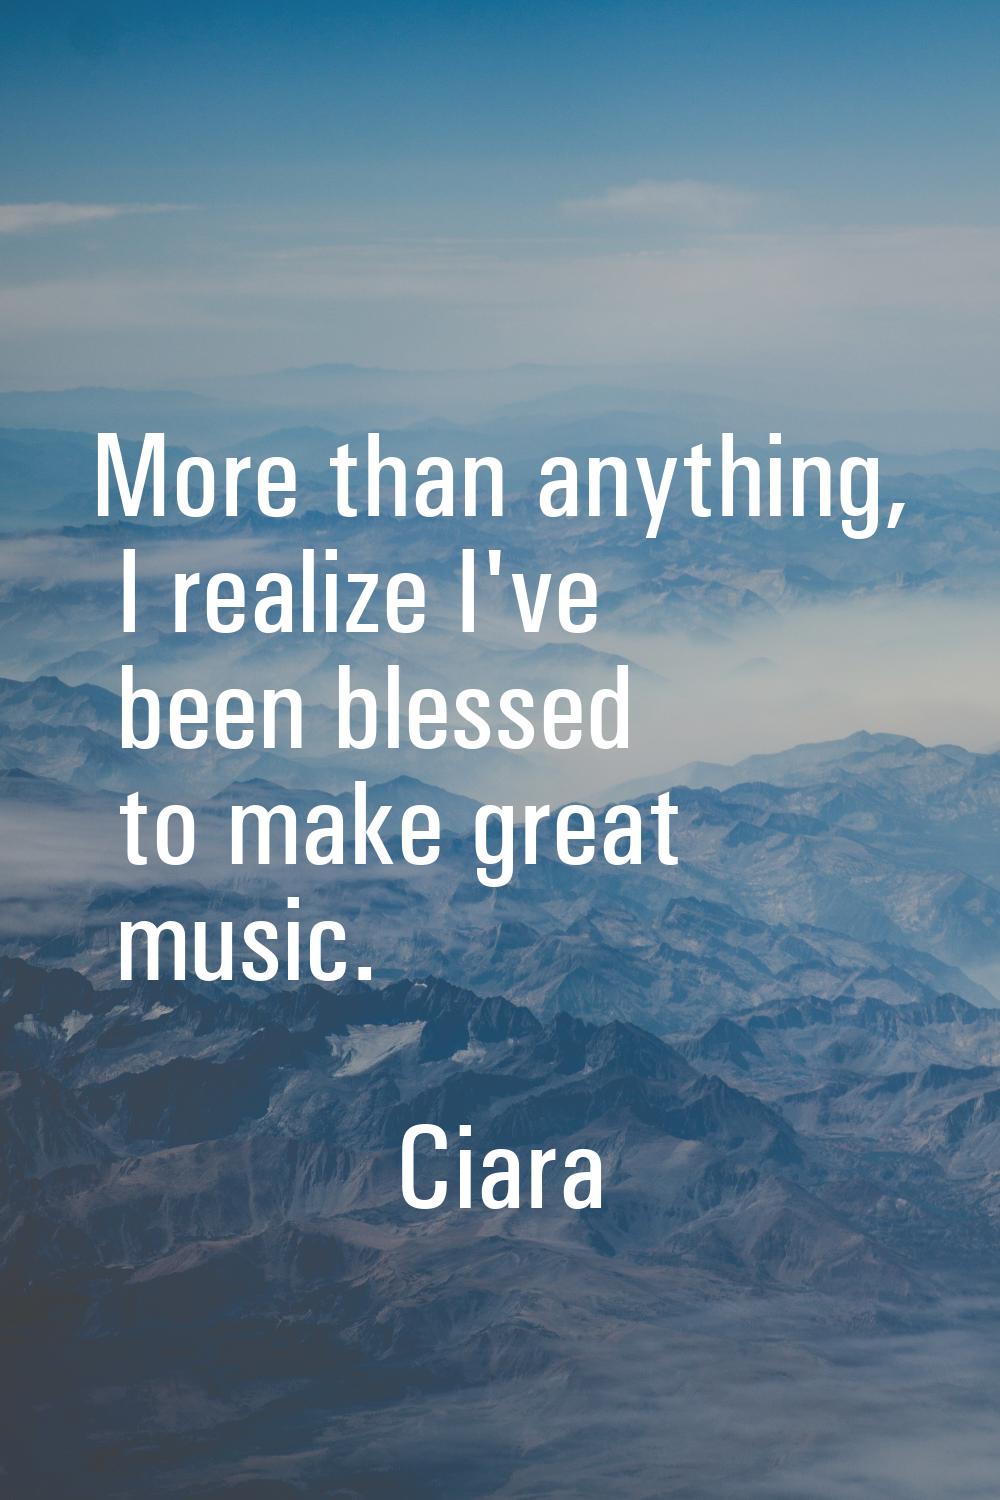 More than anything, I realize I've been blessed to make great music.